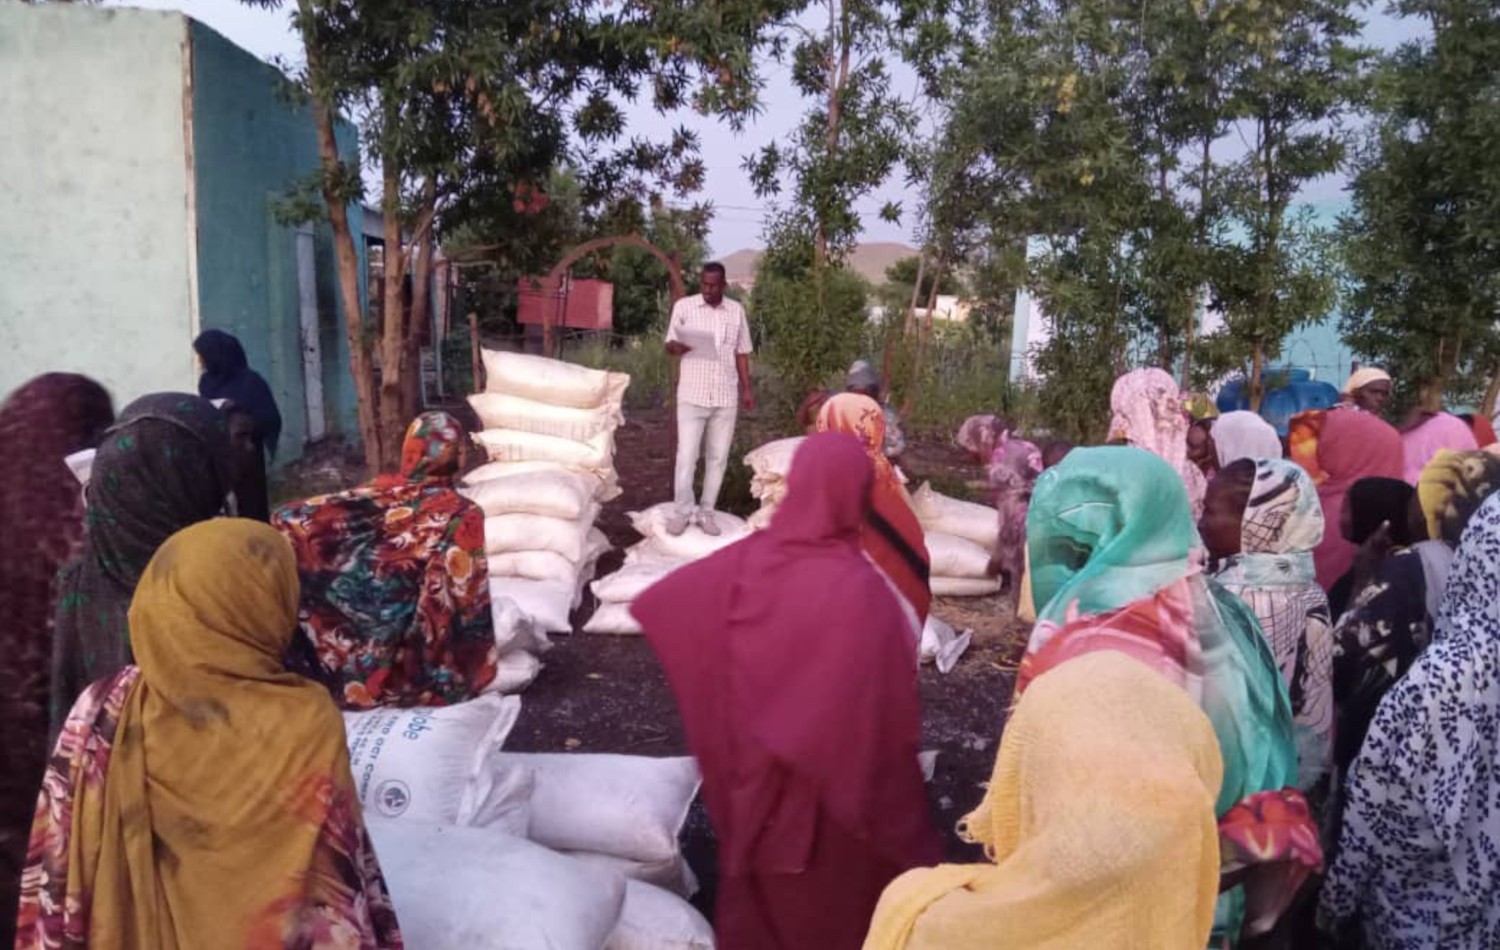 A crucial project to address the humanitarian and nutritional crisis in Sudan